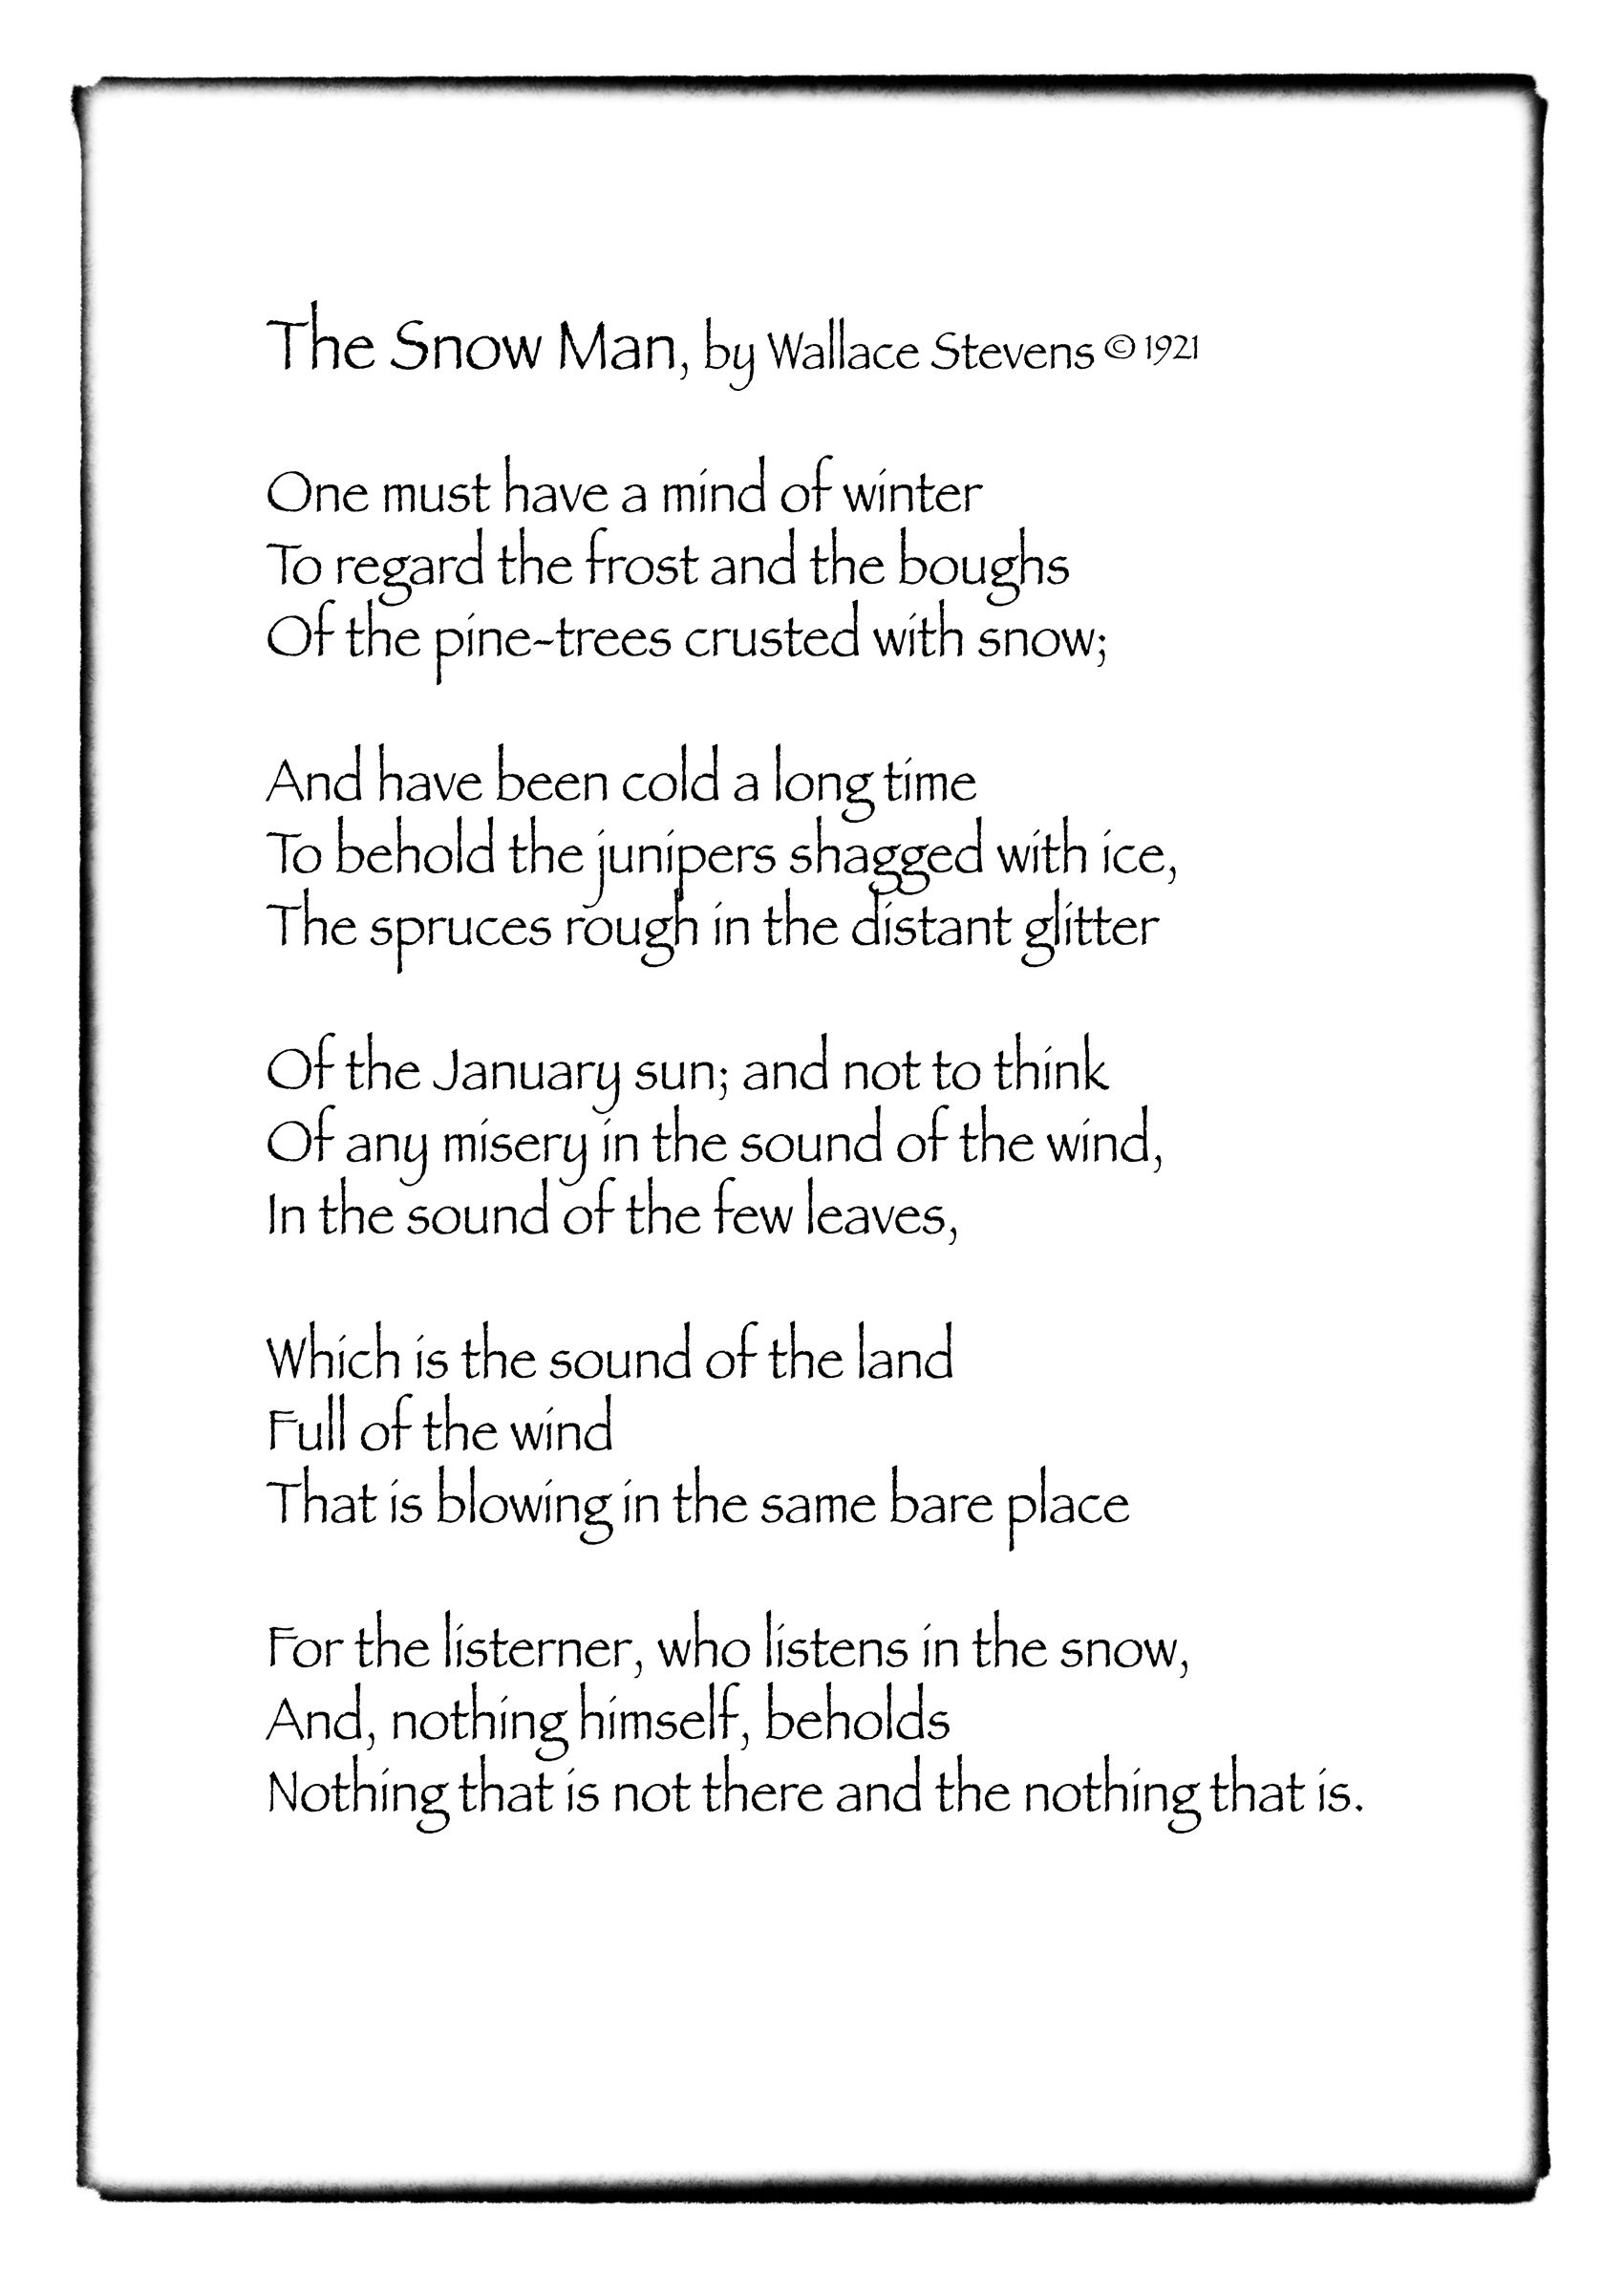 The Snow Man by Wallace Stevens ©1921